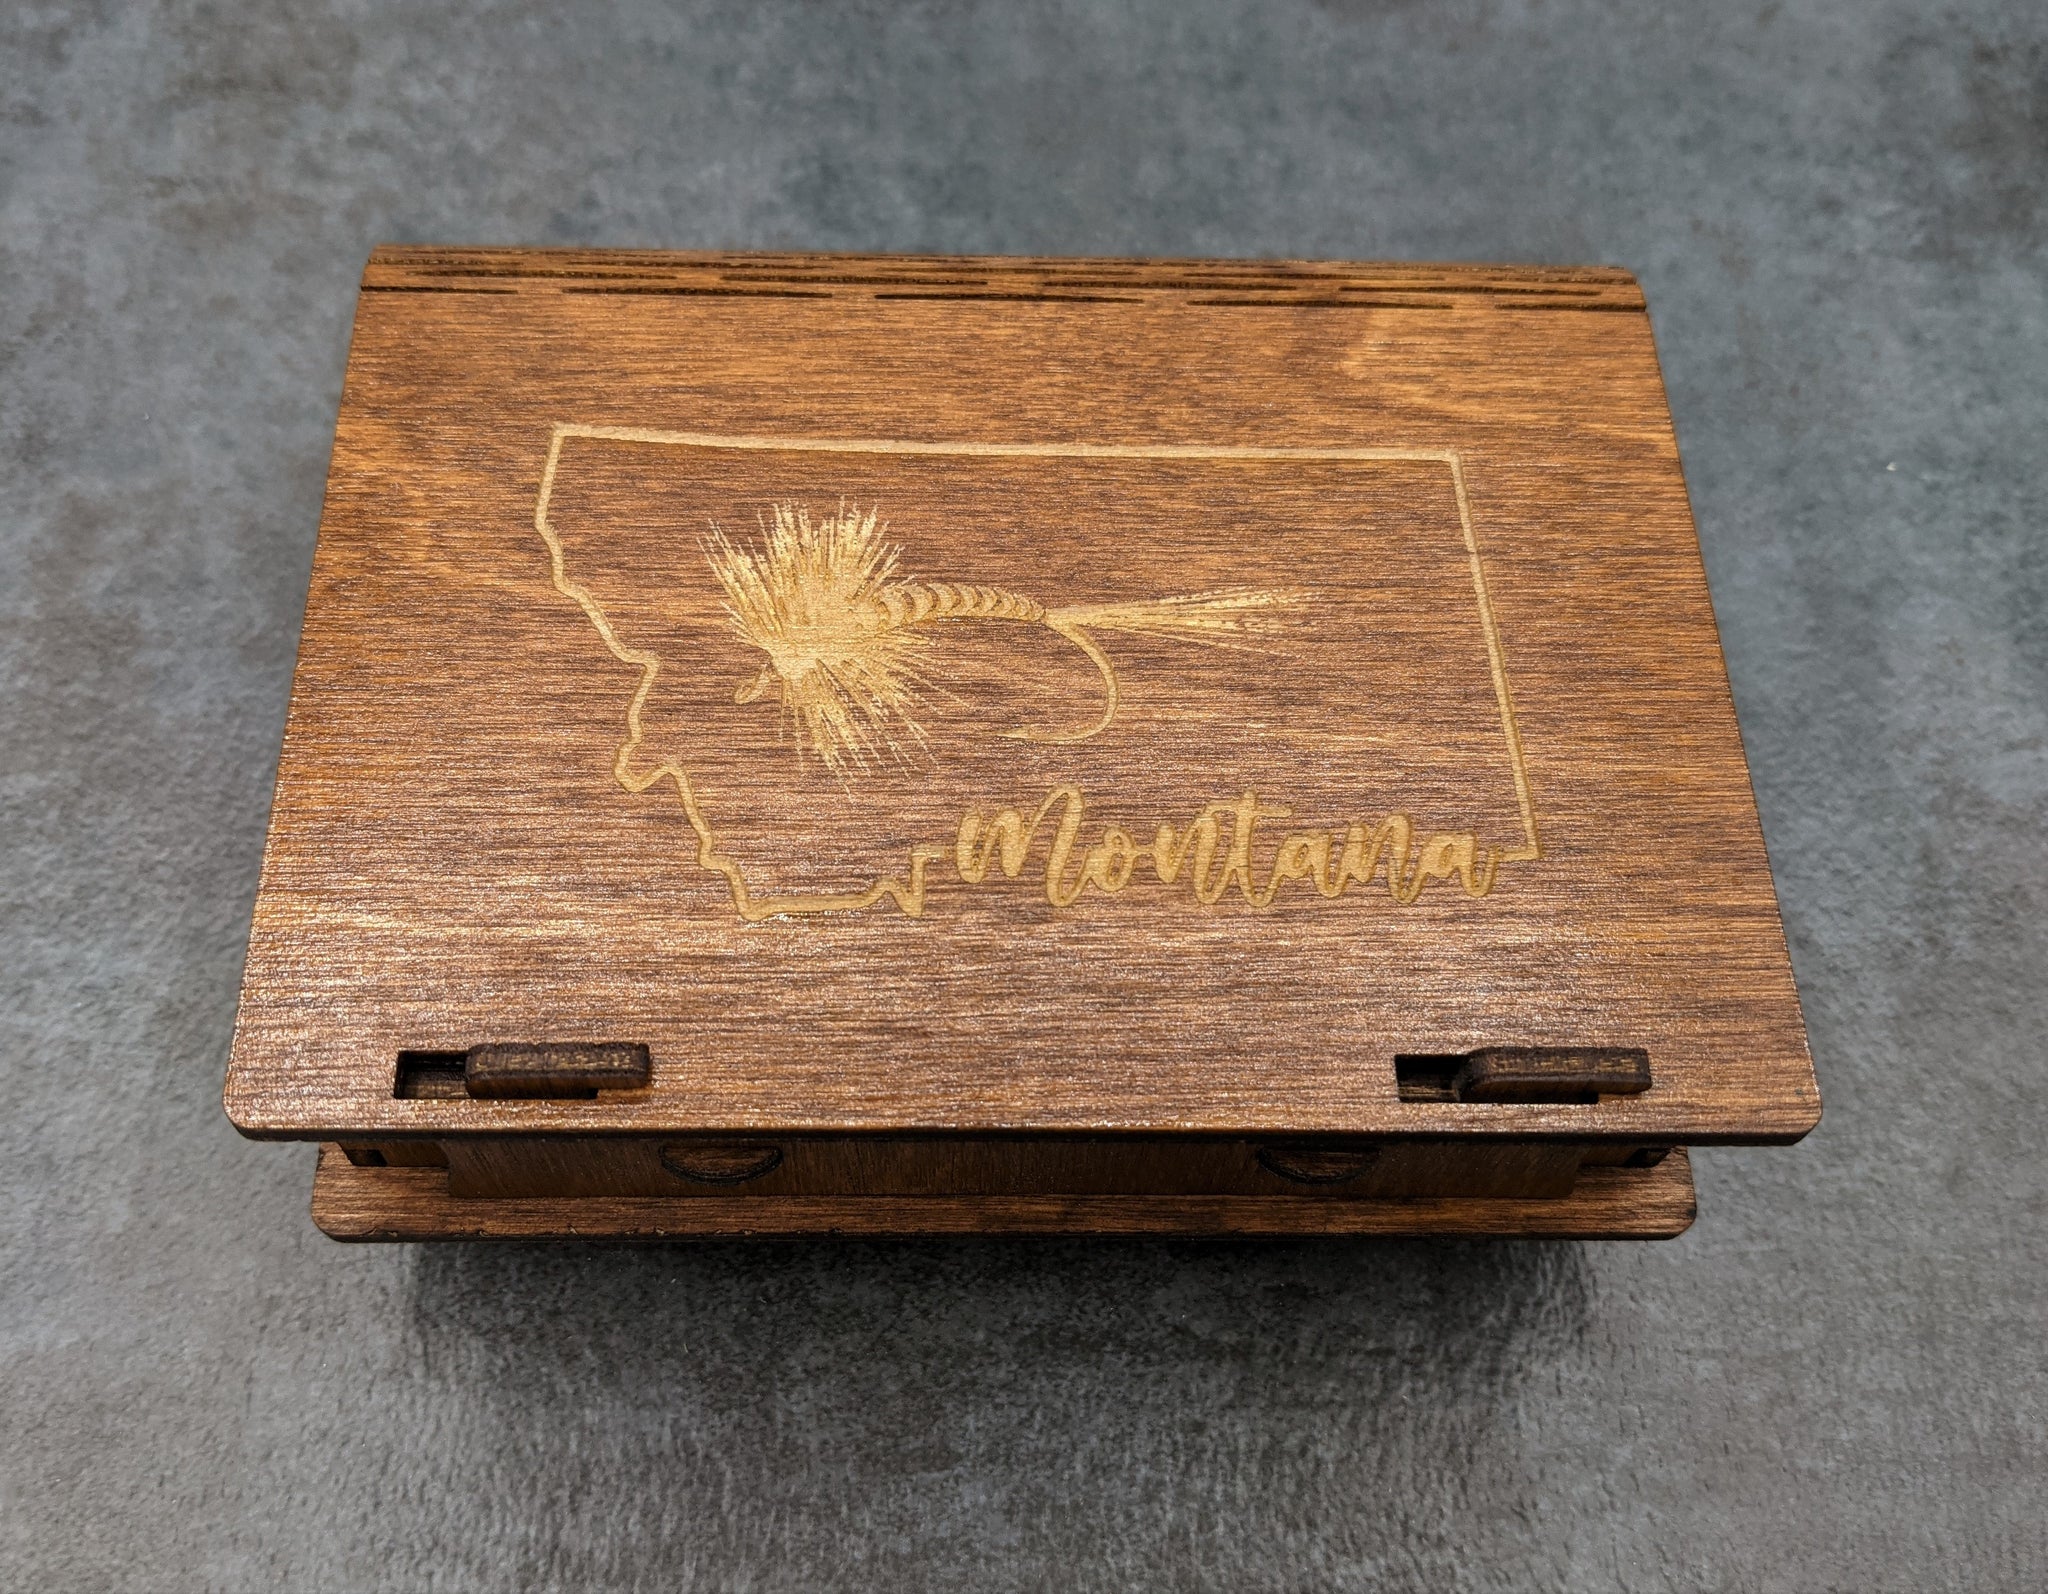 Fly Box - Laser Engraved with Living Hinge - Montana